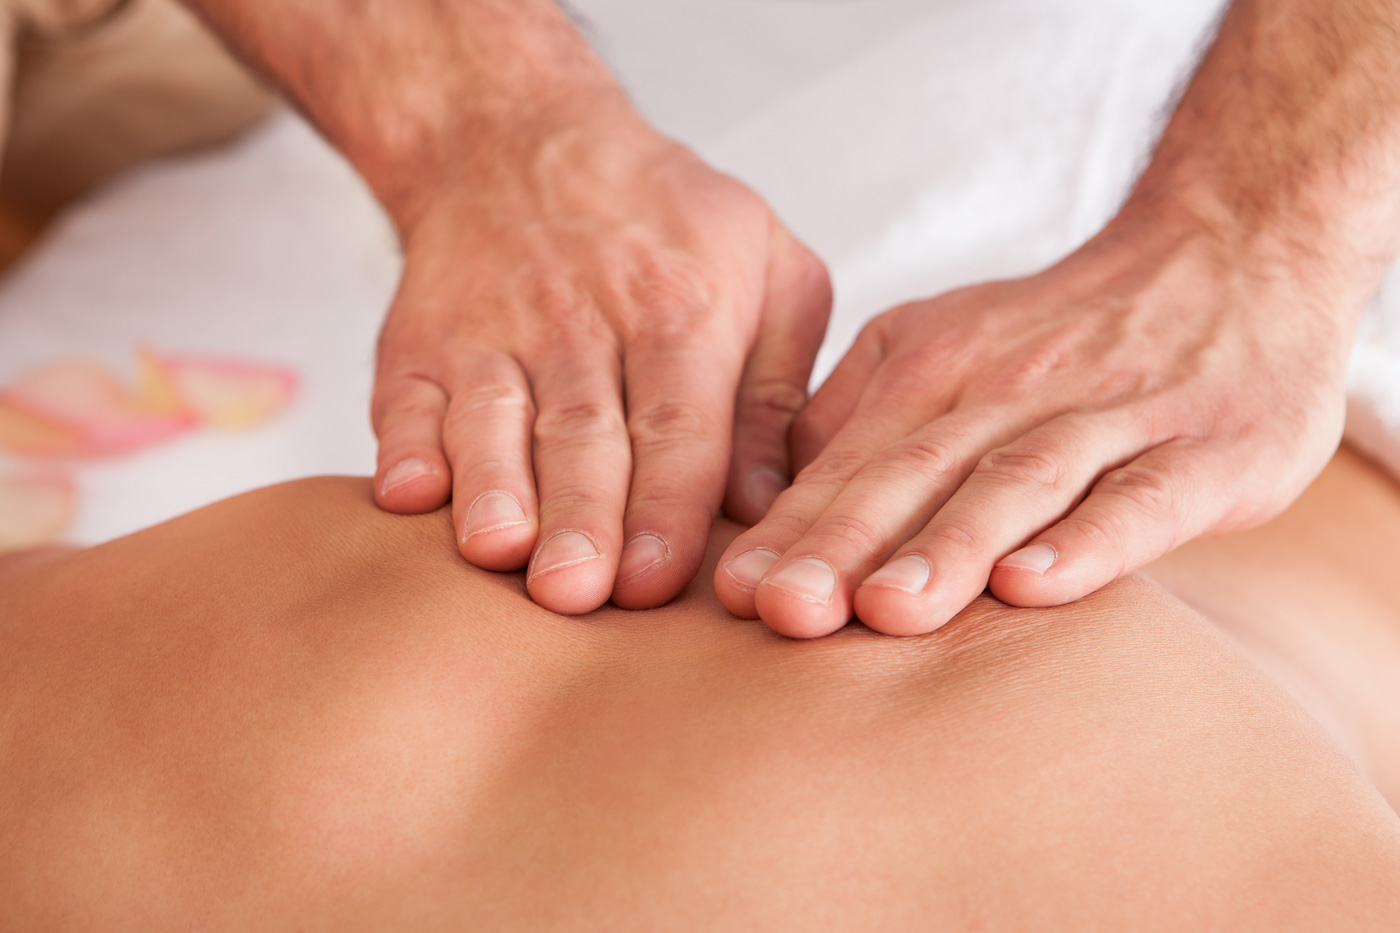 melbourne chiropractor improving spinal health with chiropractic medicine